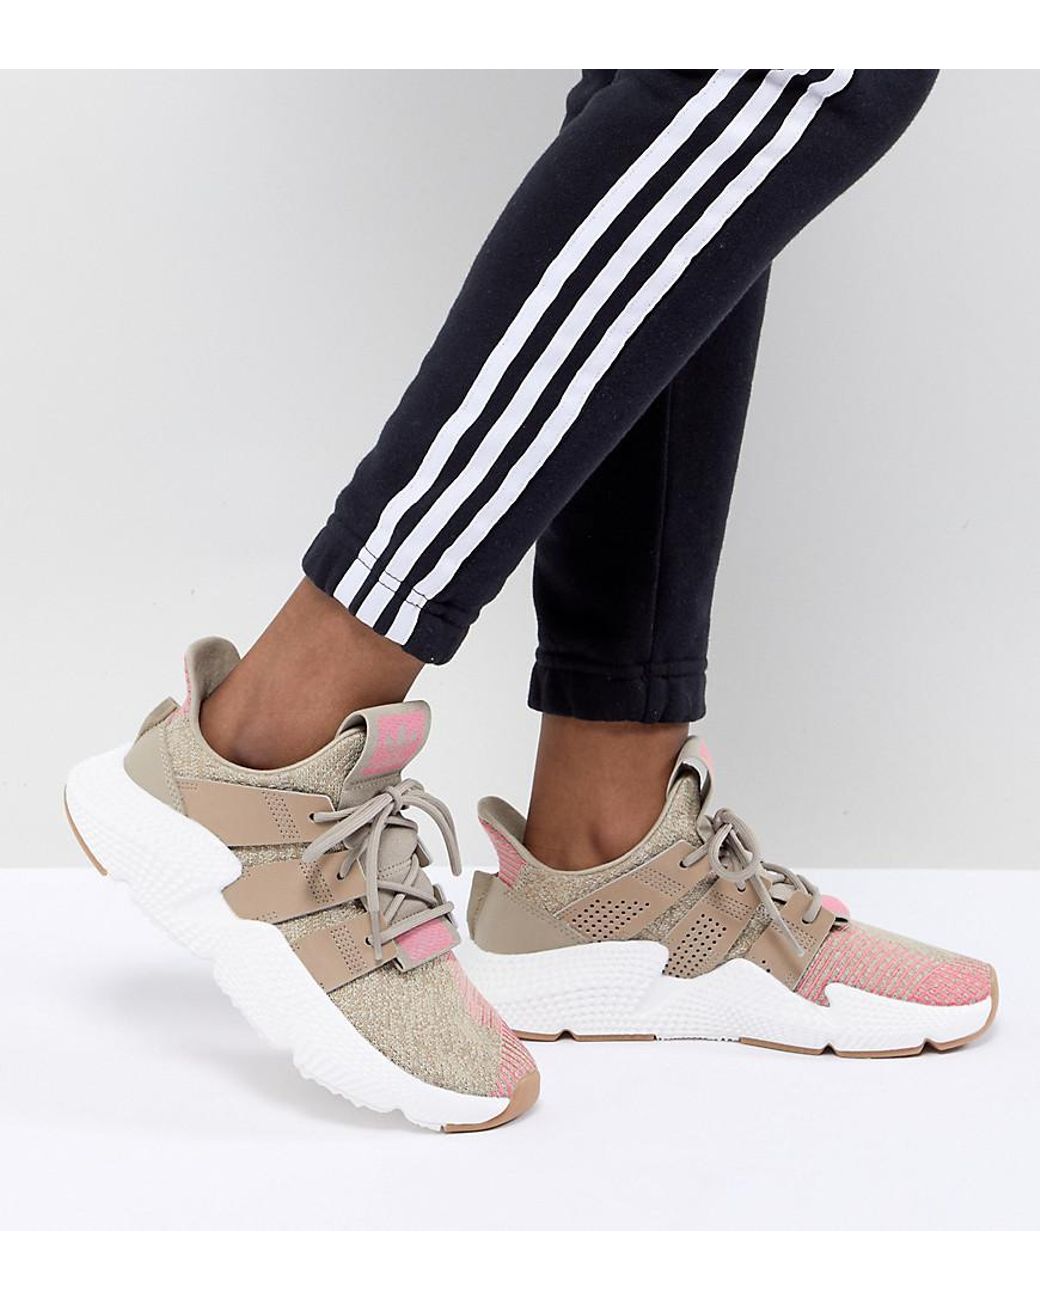 adidas Originals Prophere In Beige And Pink in Natural |